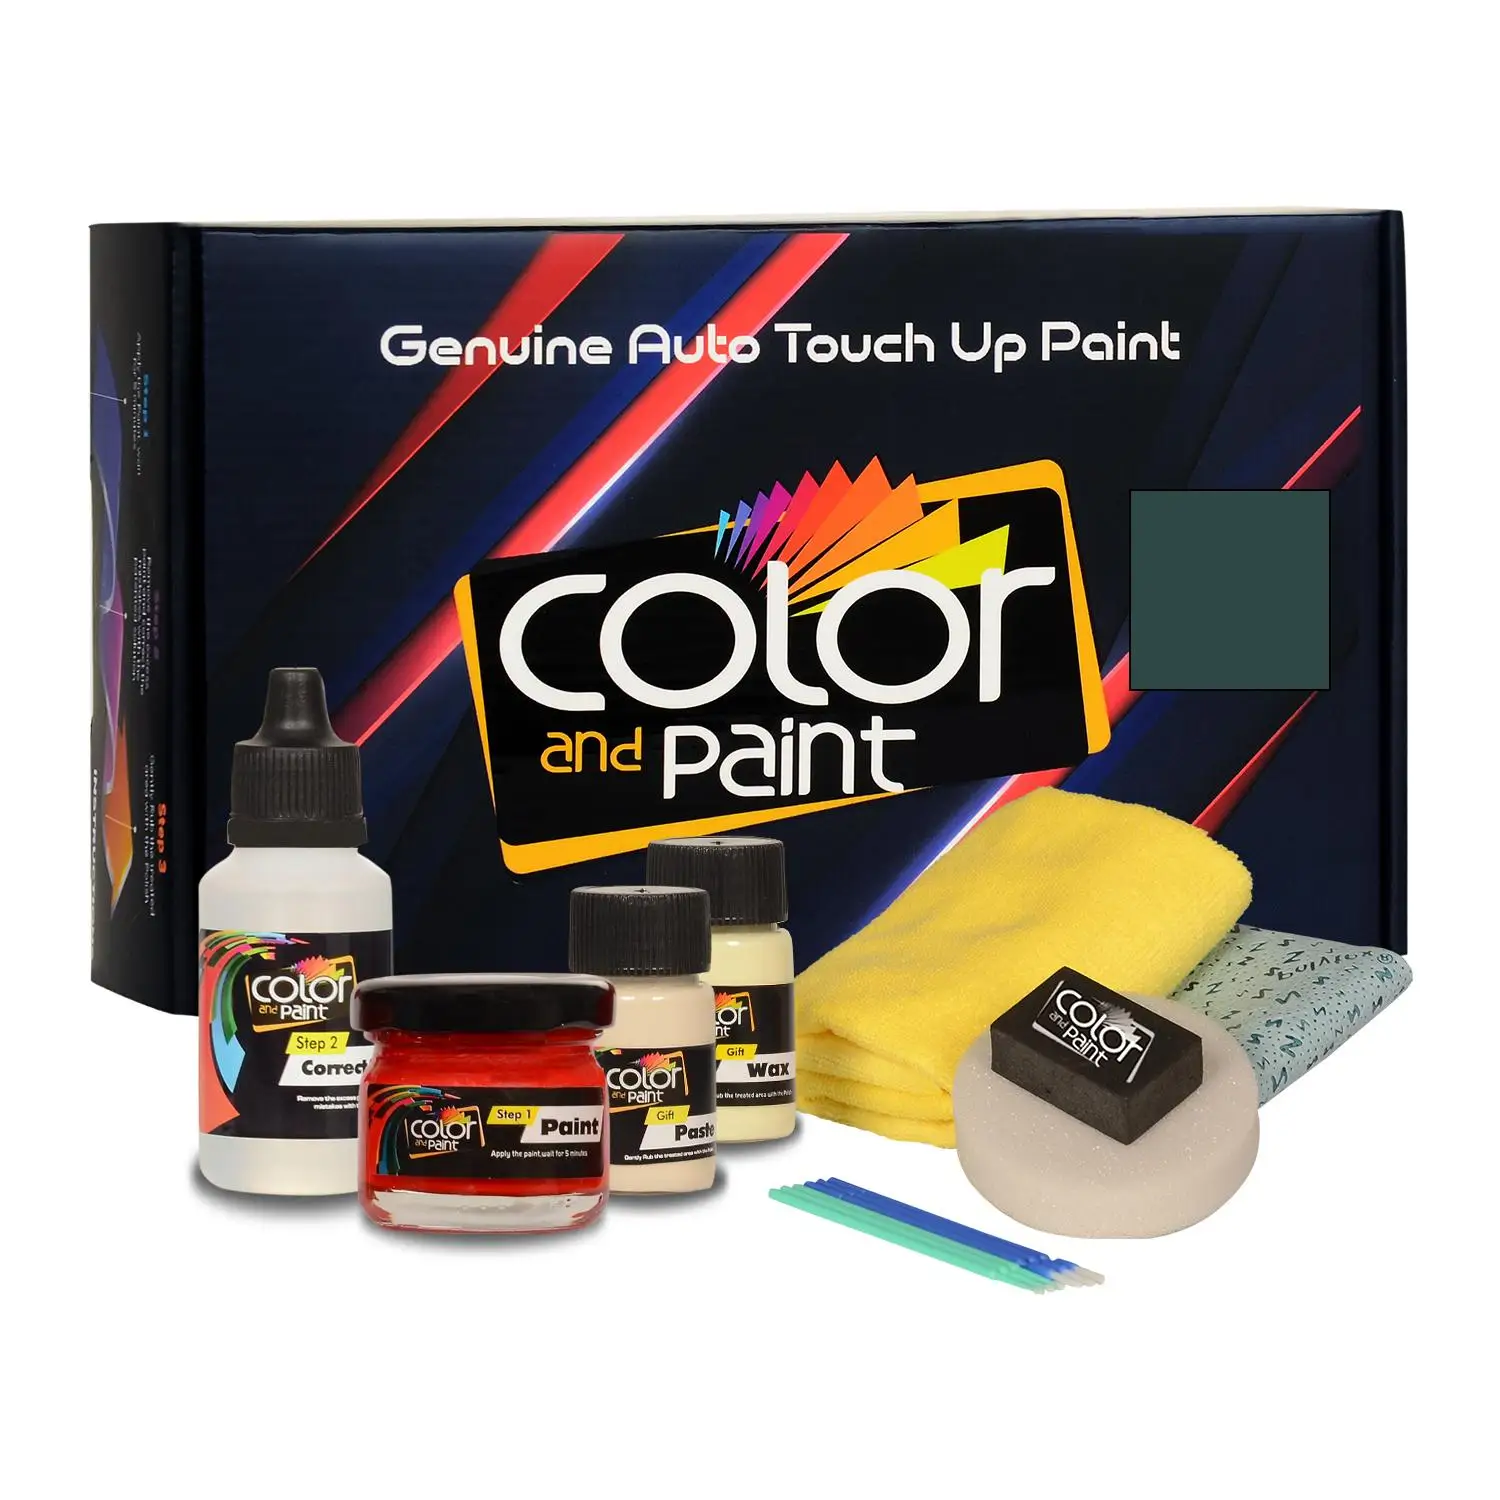 

Color and Paint compatible with Skoda Automotive Touch Up Paint - HIGHLAND GRUEN MET - 9693 - Basic Care